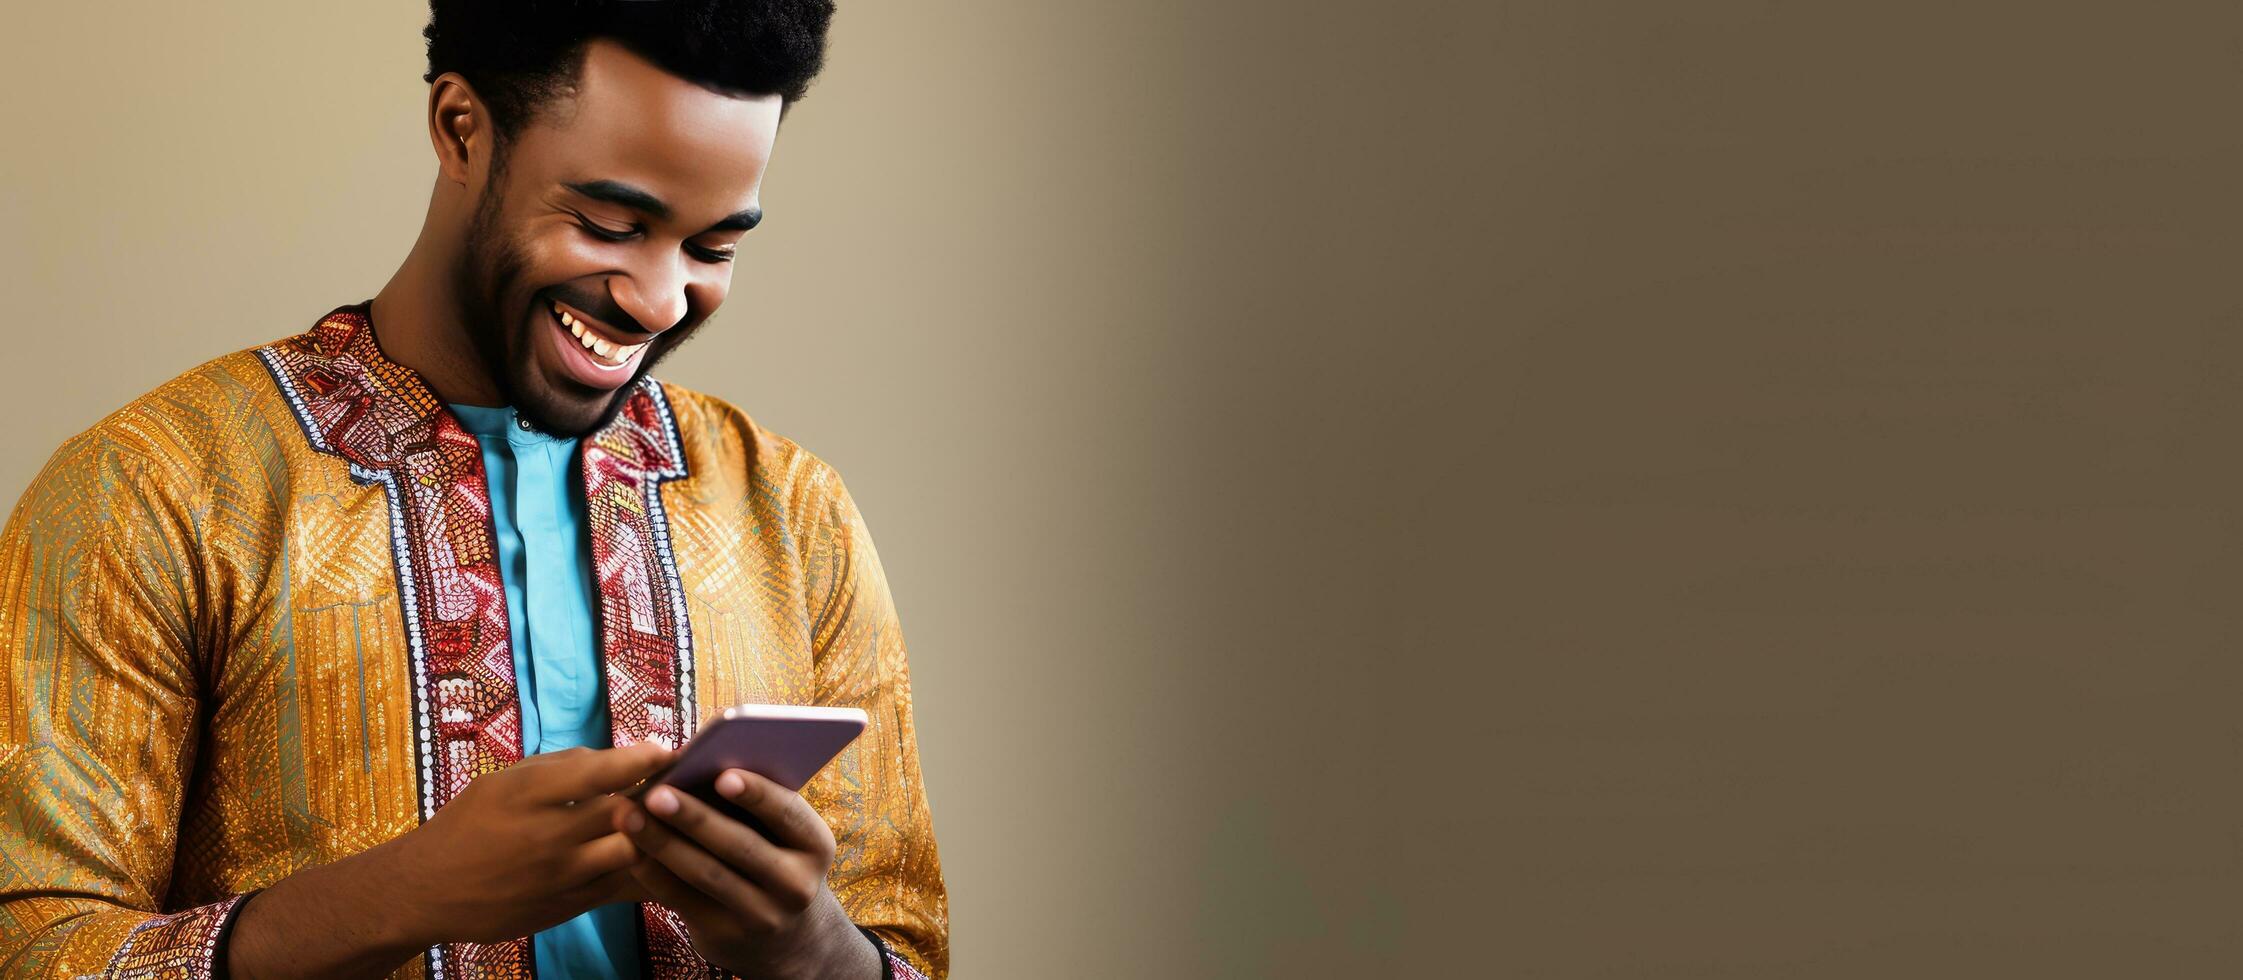 Attractive African man in African clothing happily texting on his phone in a fashion store photo